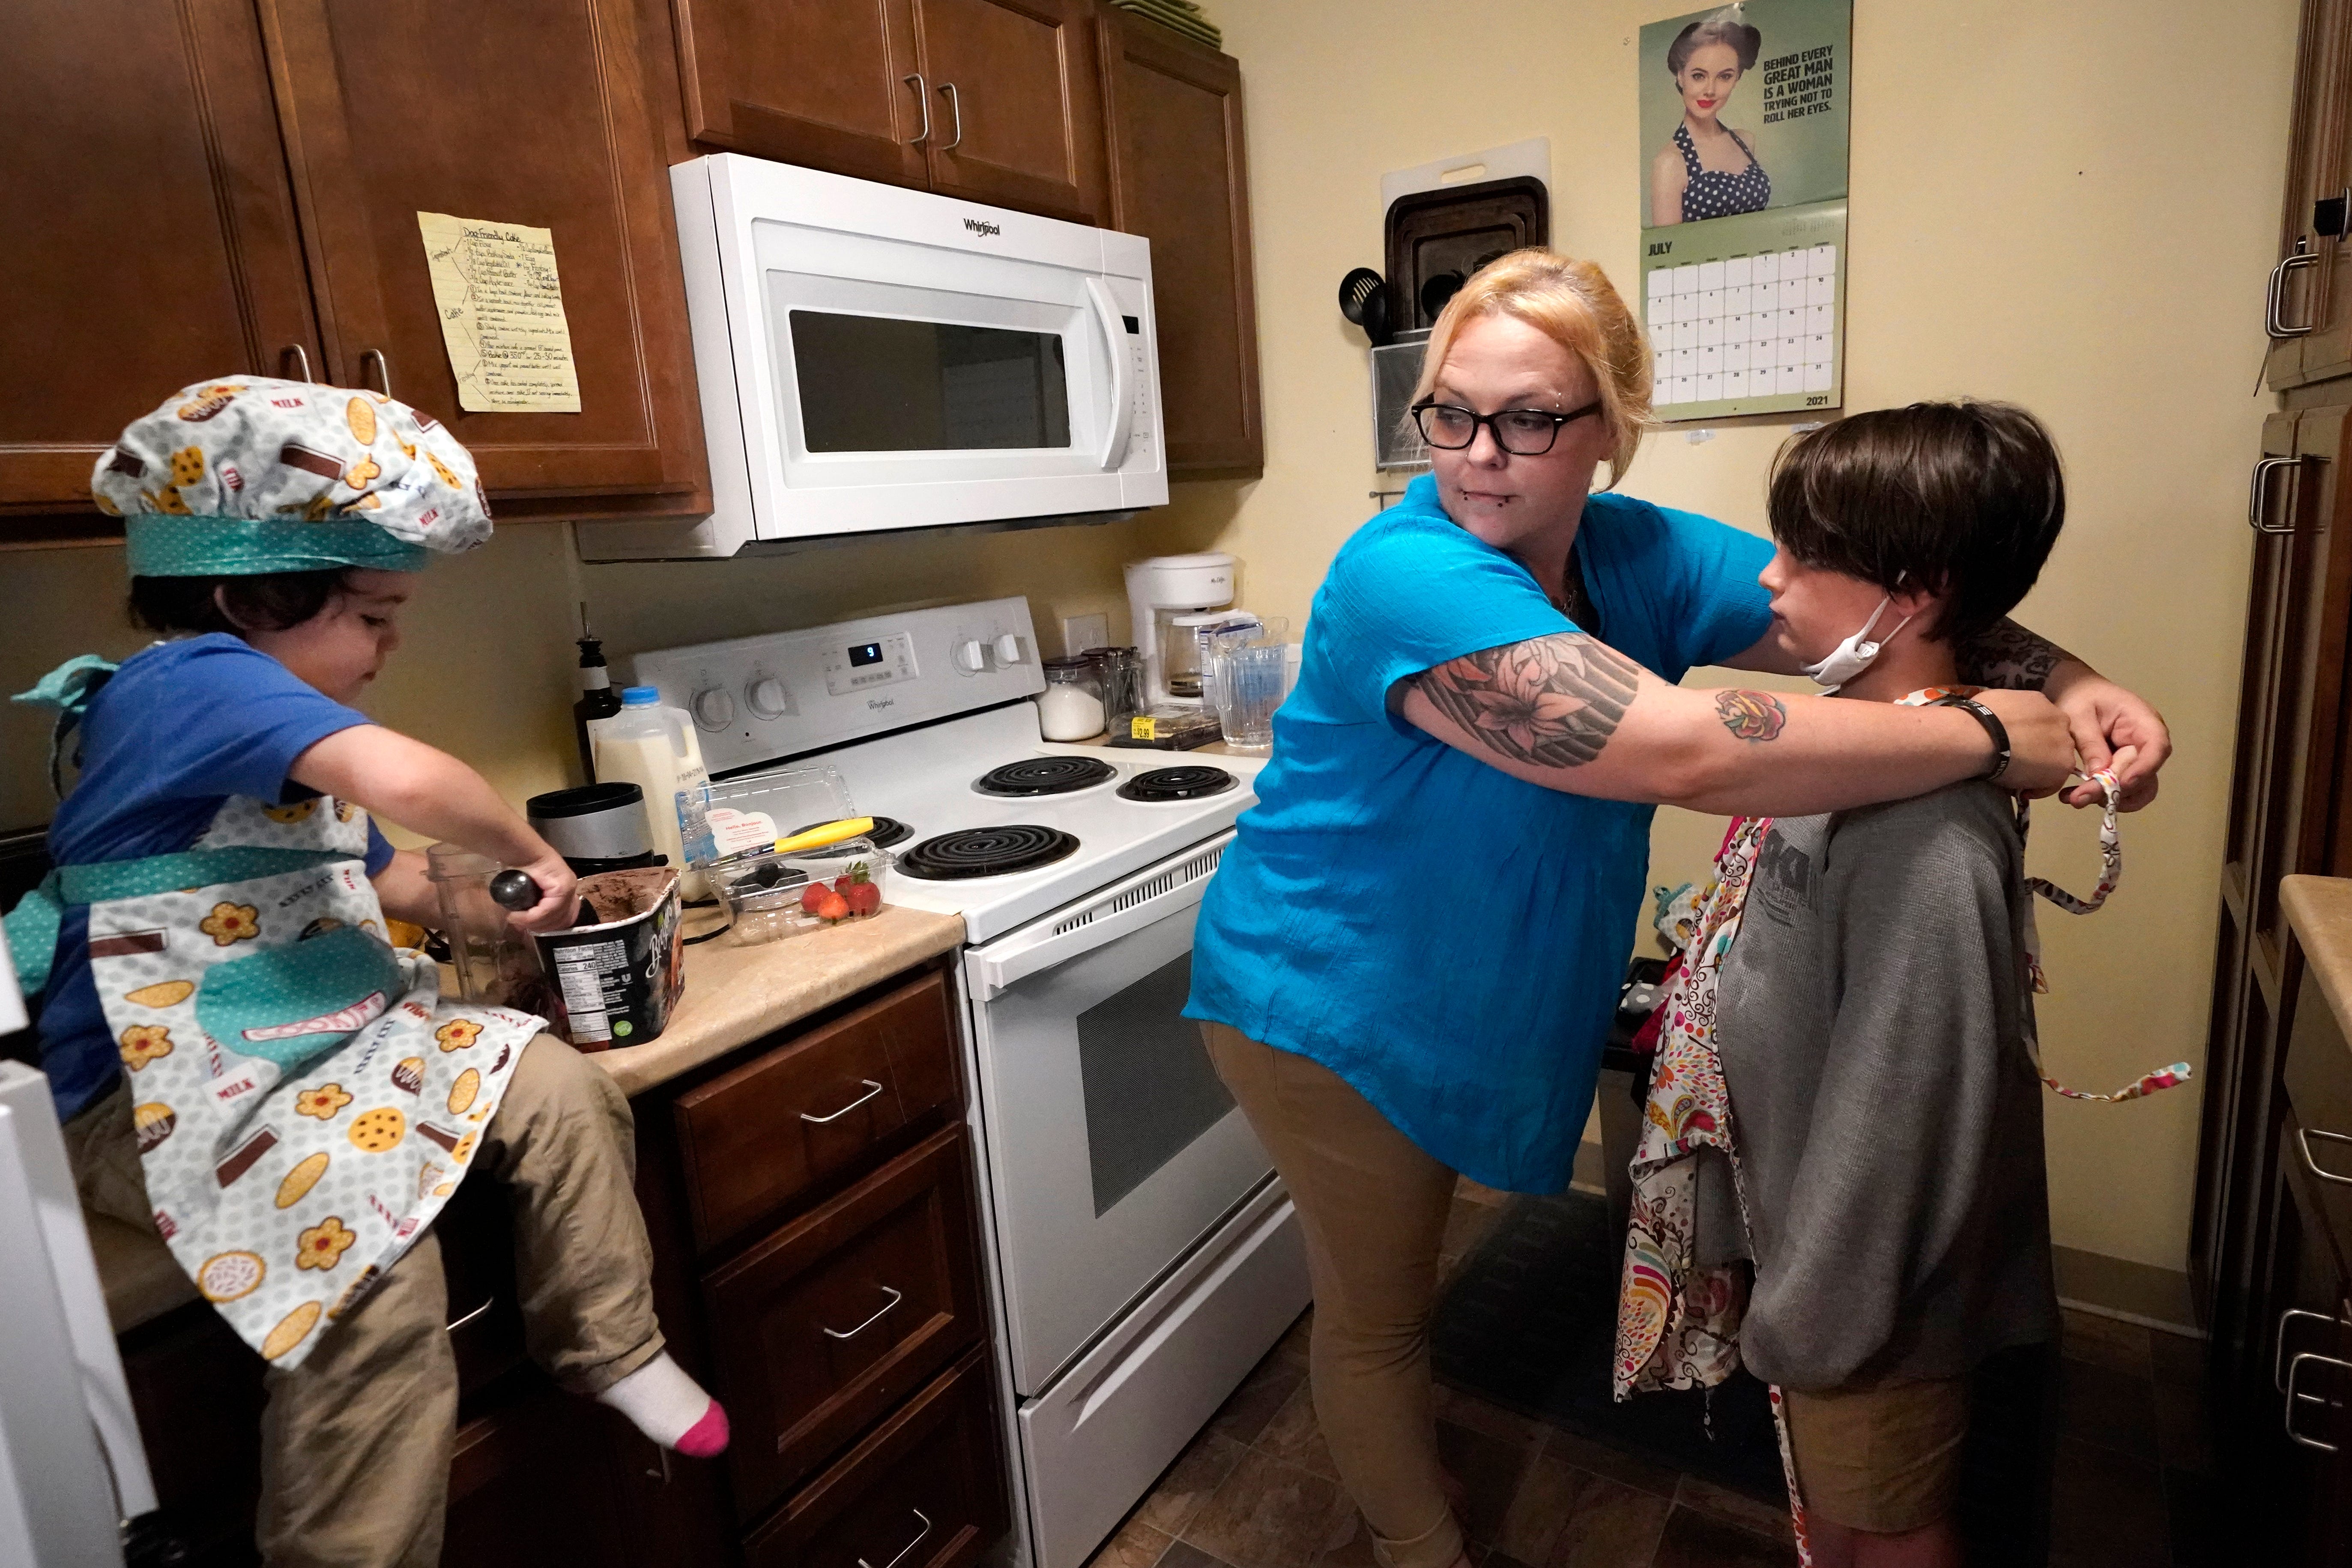 In this July 28, 2021 photo, Christina Darling and her sons, Brennan, 4, left, and Kayden, 10, prepare a snack at home in Nashua, N.H. Darling and her family have qualified for the expanded child tax credit, part of President Joe Biden